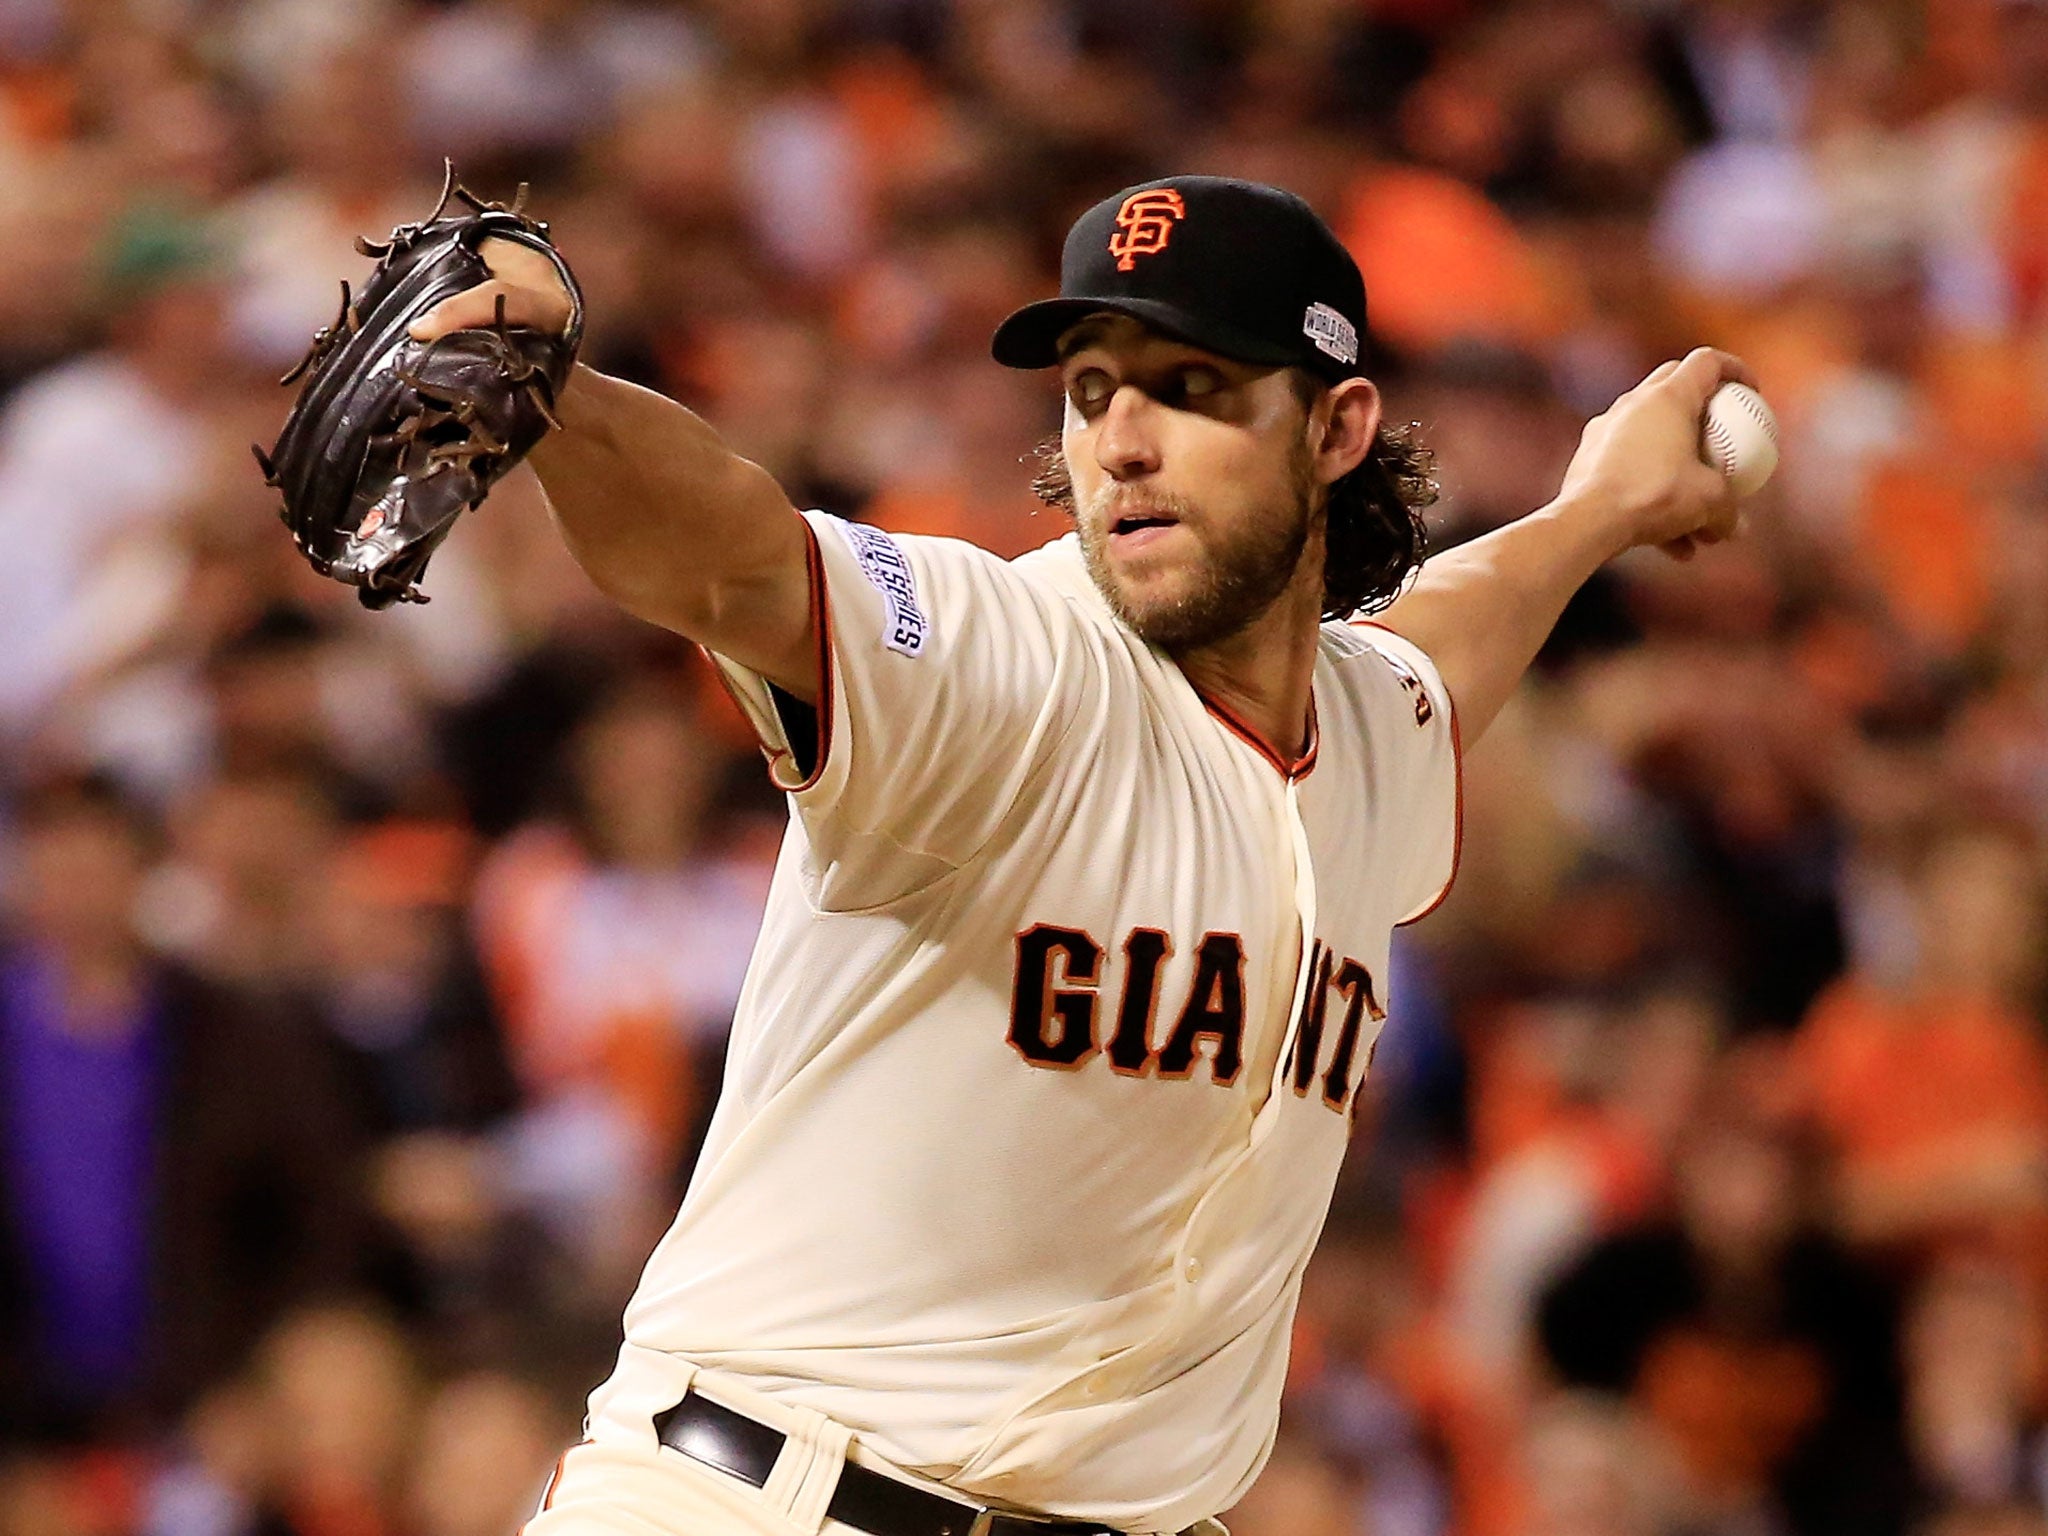 Madison Bumgarner inspired the San Francisco Giants to a 5-0 win over the Kansas City Royals